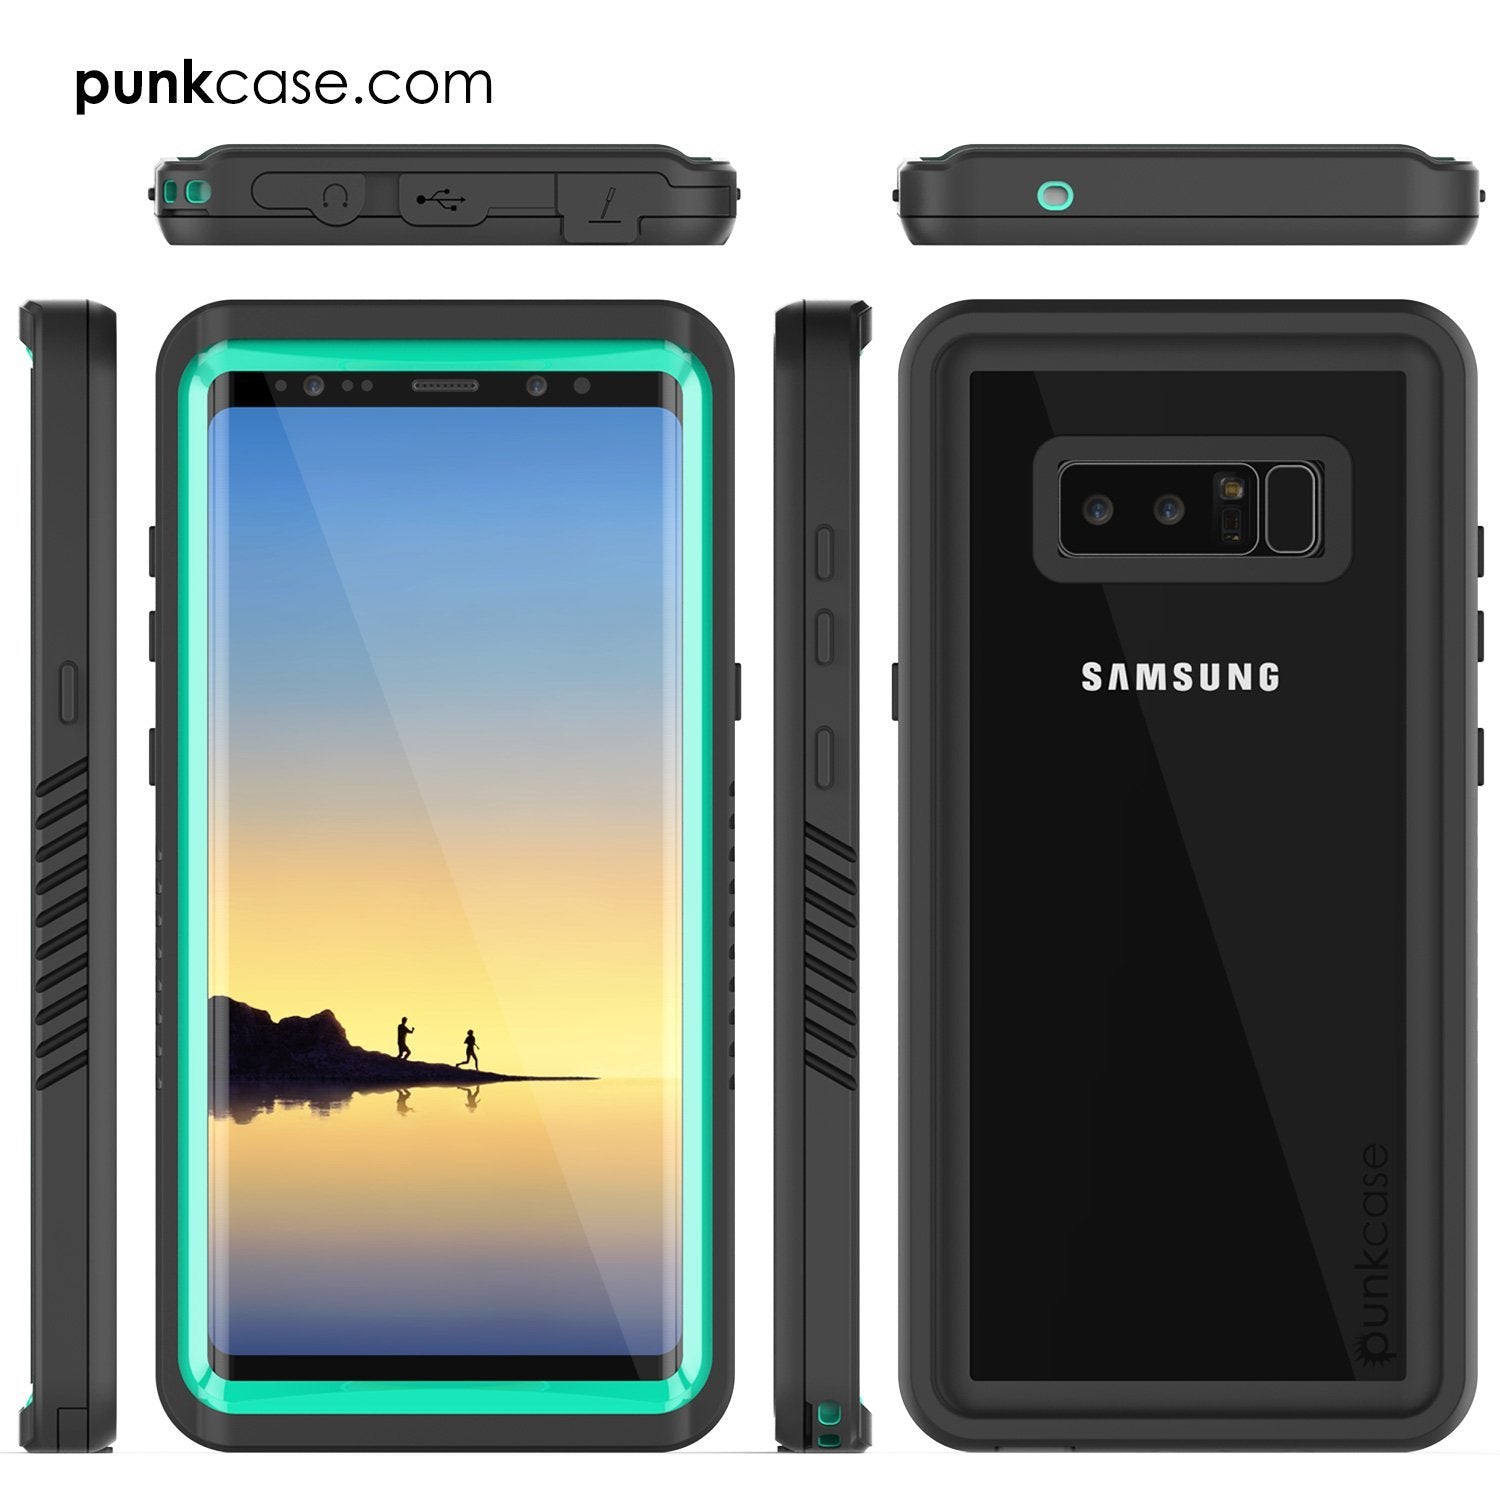 Galaxy Note 8 Case, Punkcase [Extreme Series] [Slim Fit] [IP68 Certified] [Shockproof] Armor Cover W/ Built In Screen Protector [Teal] - PunkCase NZ